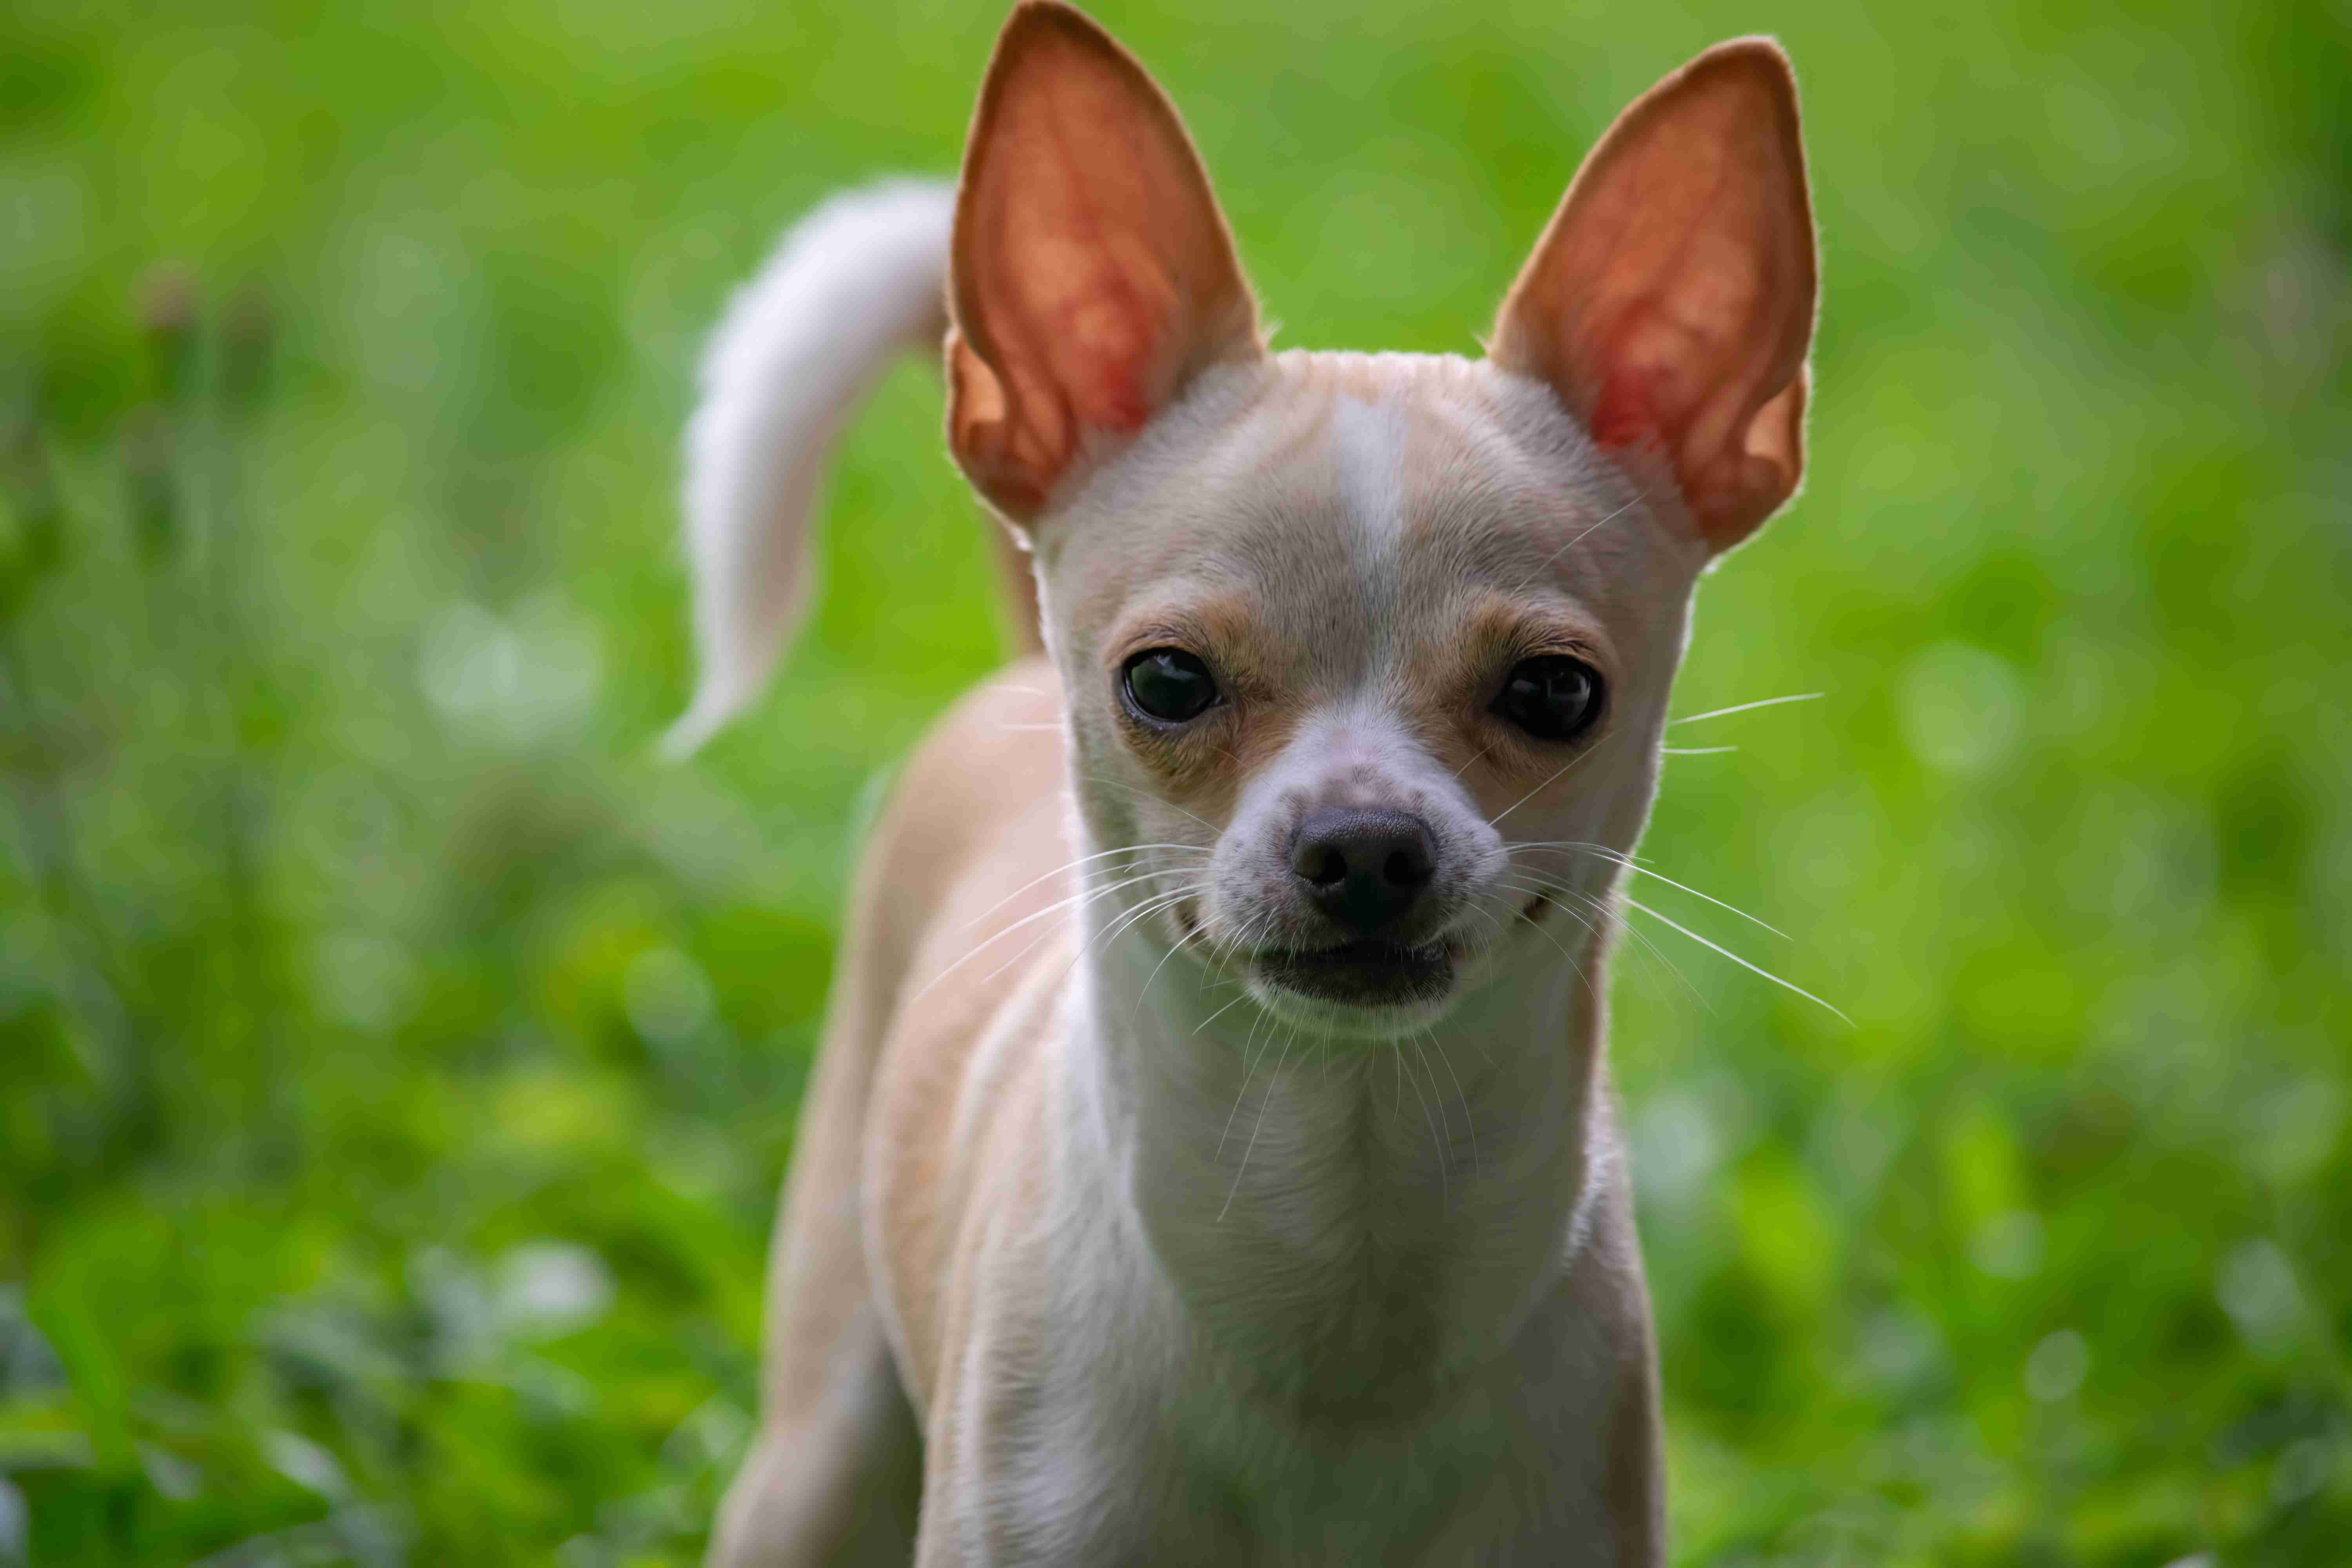 How can I tell if my Chihuahua is aggressive or just playful?